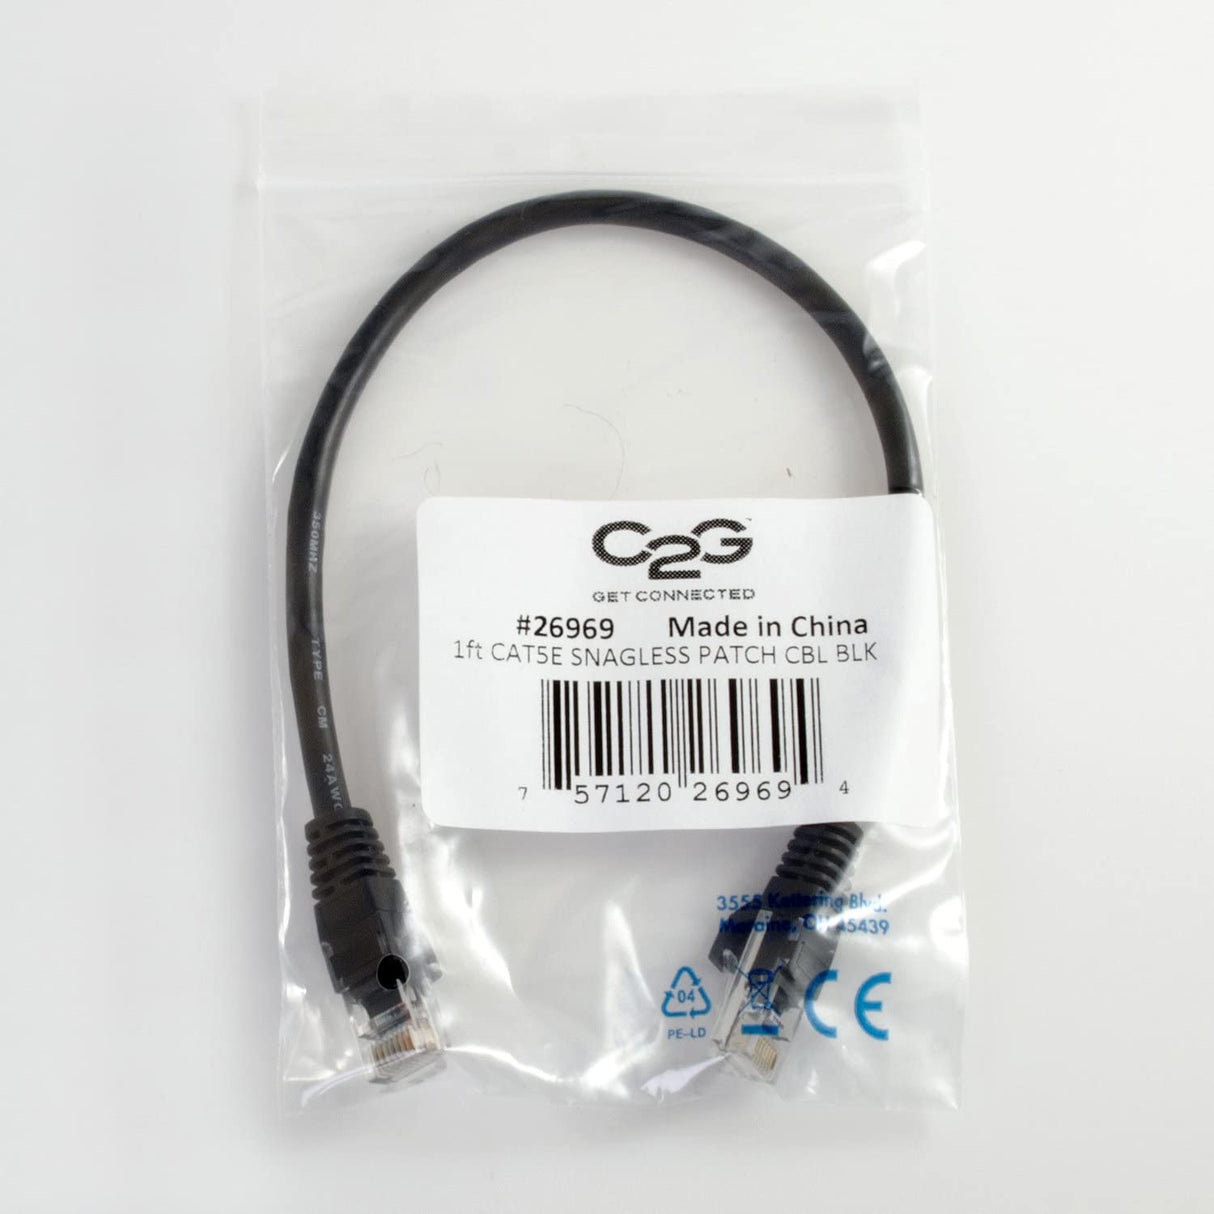 C2g/ cables to go C2G 15208 Cat5e Cable - Snagless Unshielded Ethernet Network Patch Cable, Black (14 Feet, 4.26 Meters)